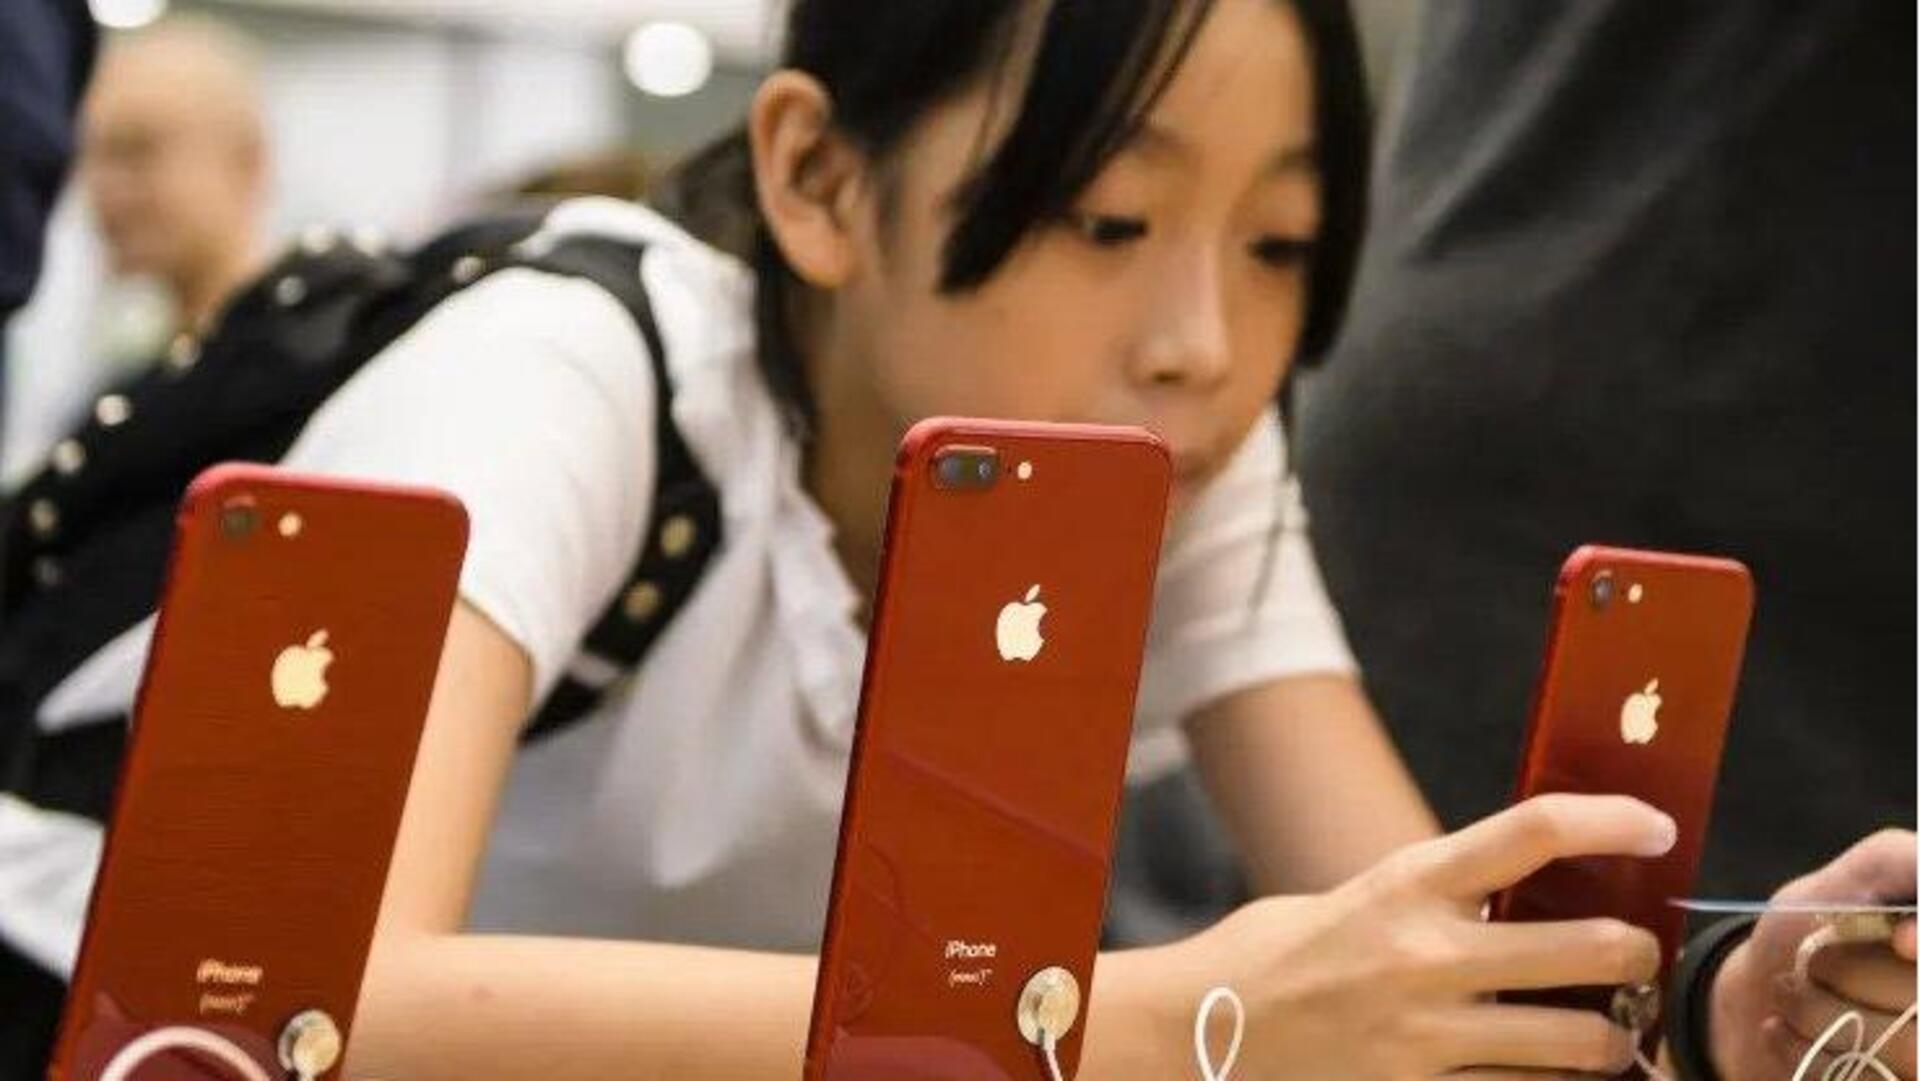 China flags security concerns with iPhones amid reports of ban